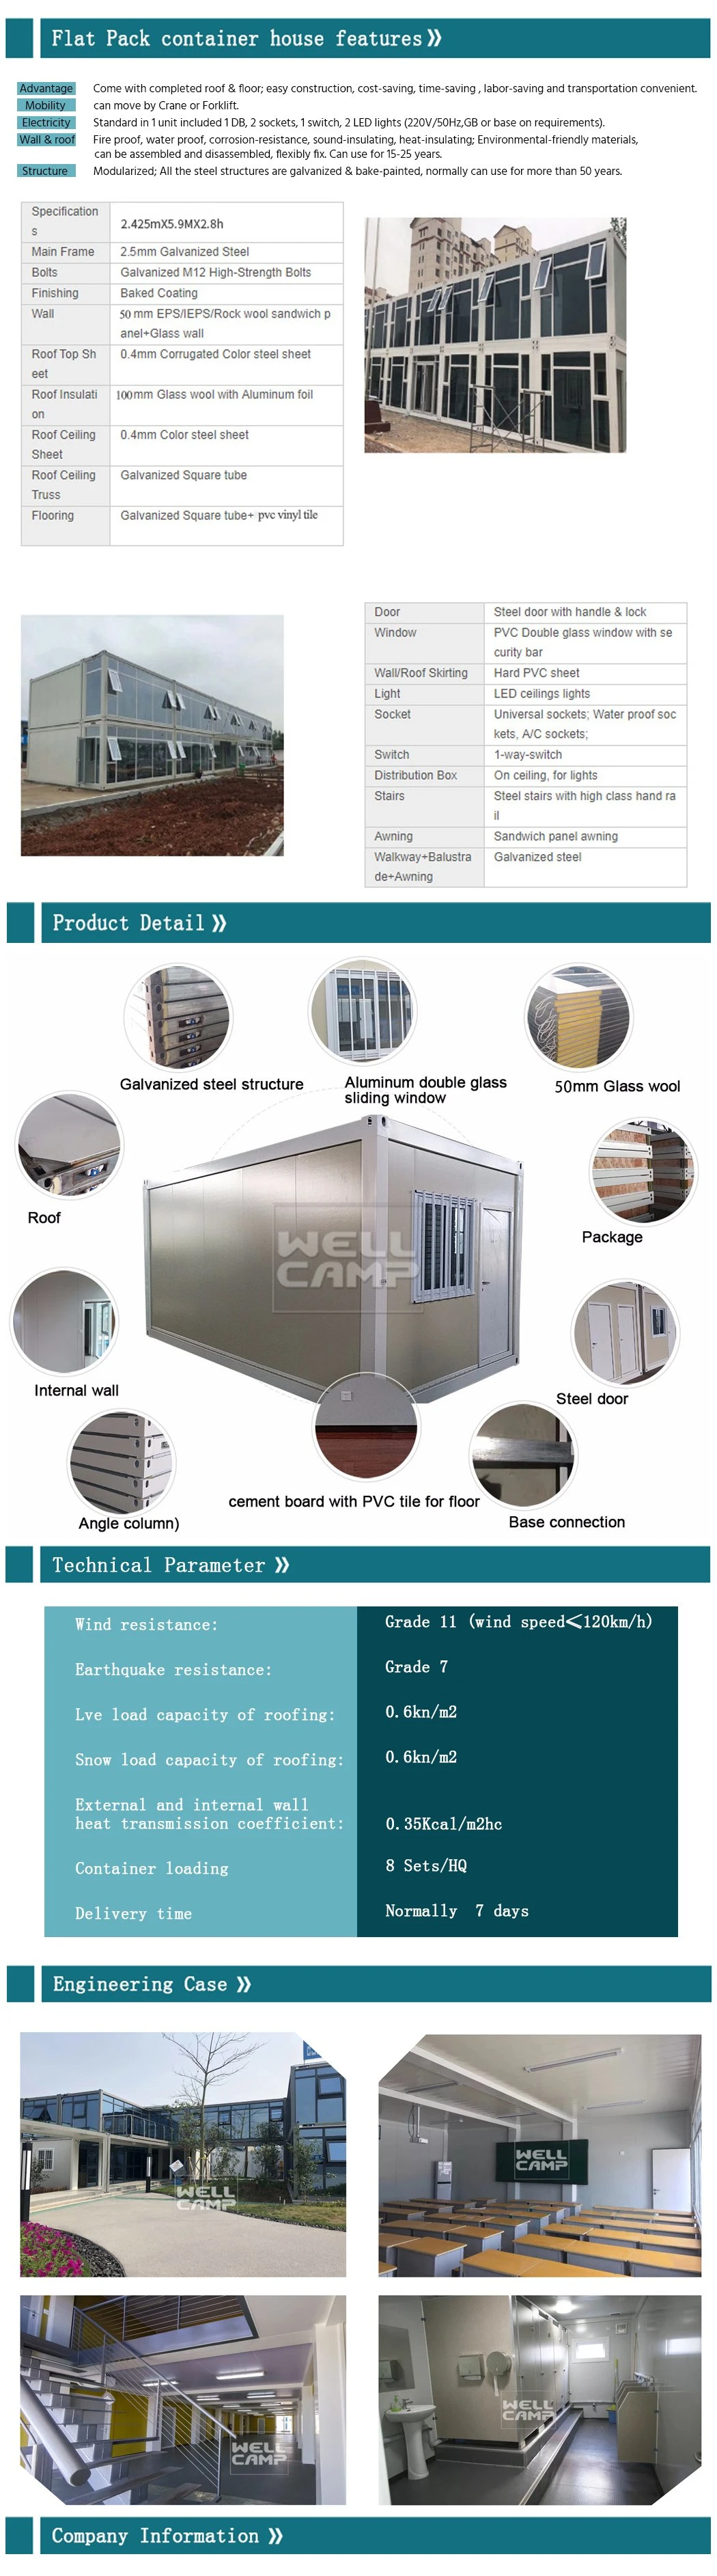 Factory Price Prefabricated Building Prefab Moveable Container Office Workshop Portable Mobile Office